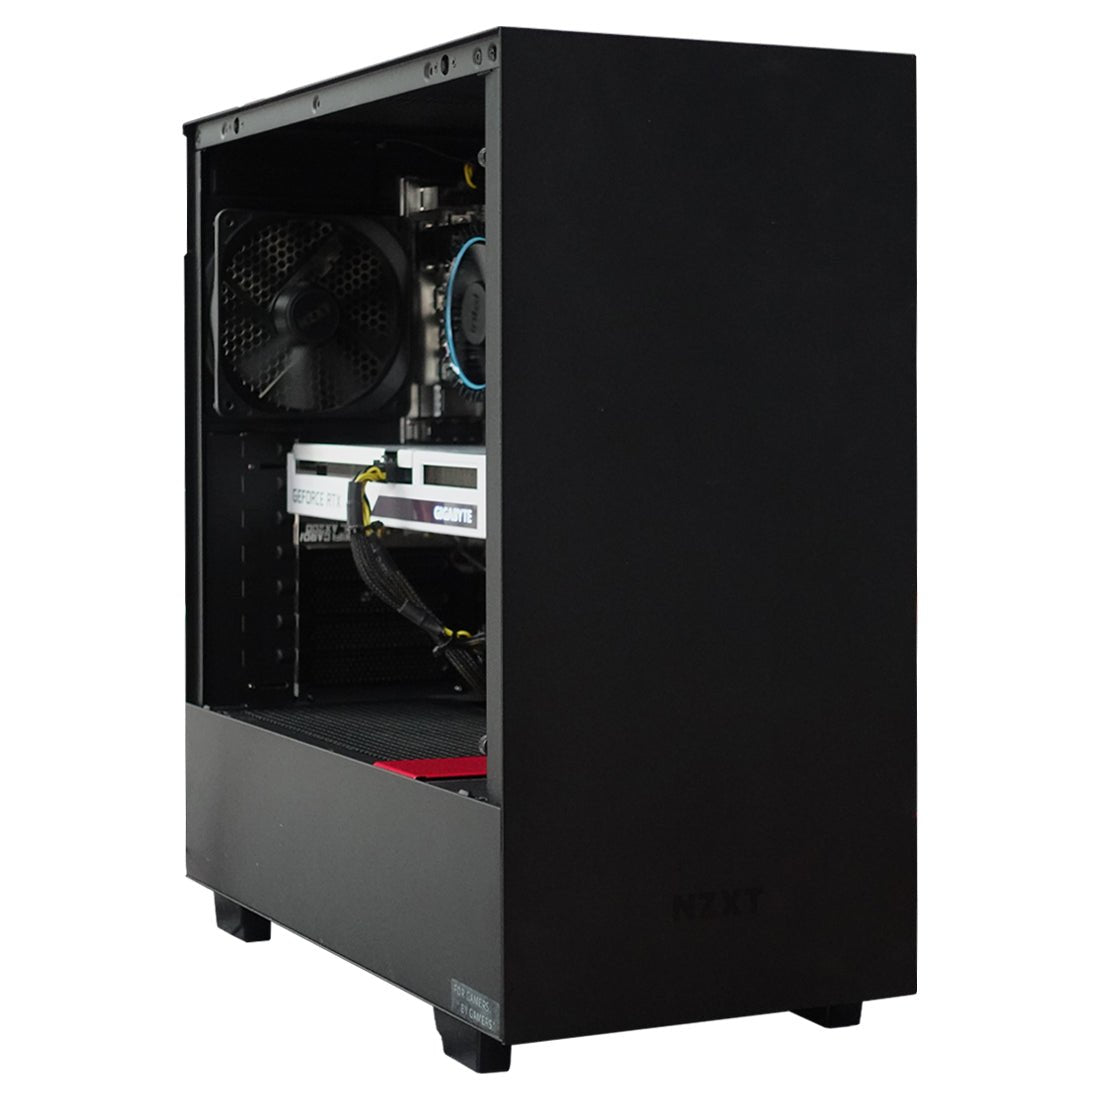 (Pre-Owned) Gaming PC Intel Core i5-13400F w/ Gigabyte RTX 3060 Vision OC & NZXT H510 - Black - كمبيوتر مستعمل - Store 974 | ستور ٩٧٤